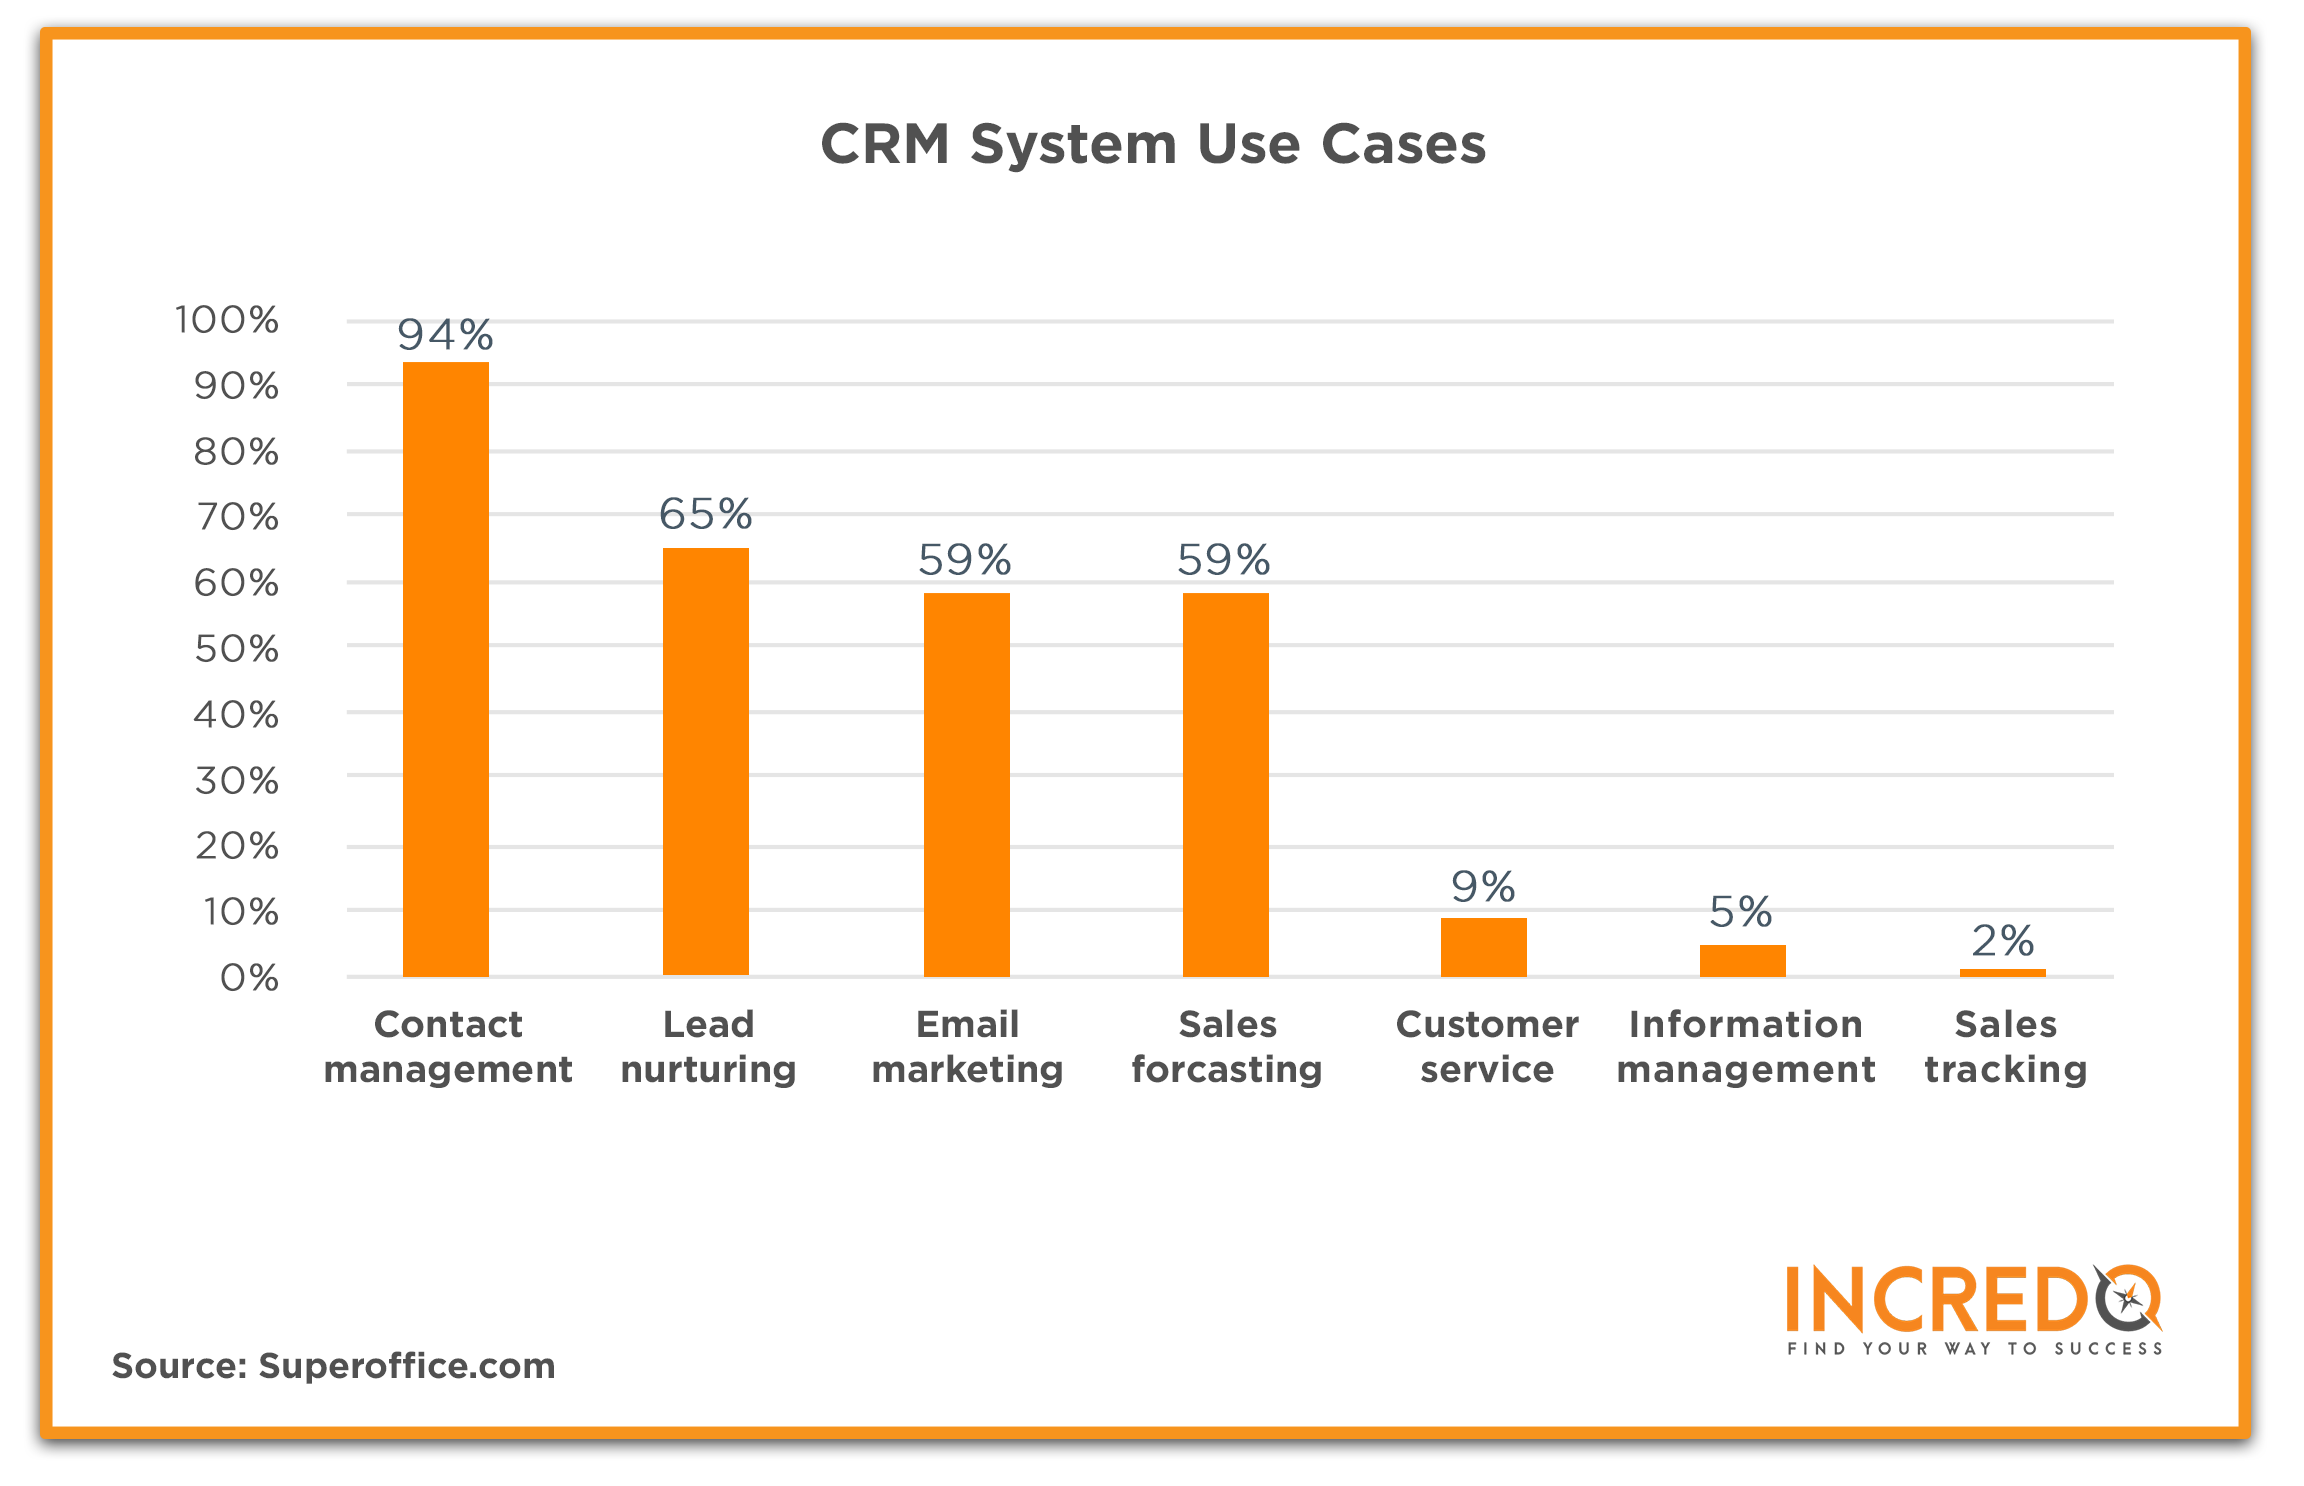 CRM system use cases